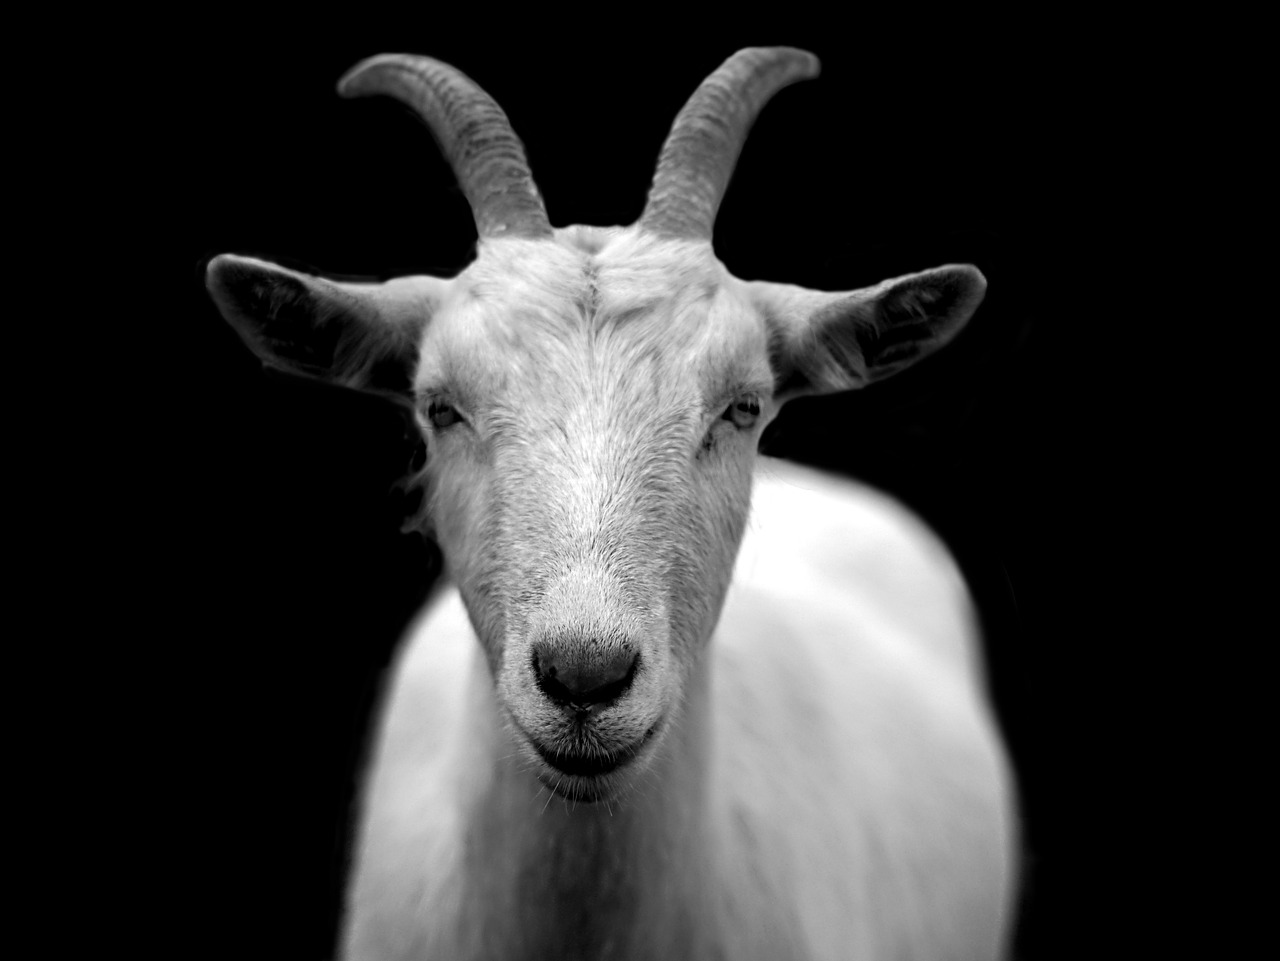 BitGo, a Goat for the Chivo wallet